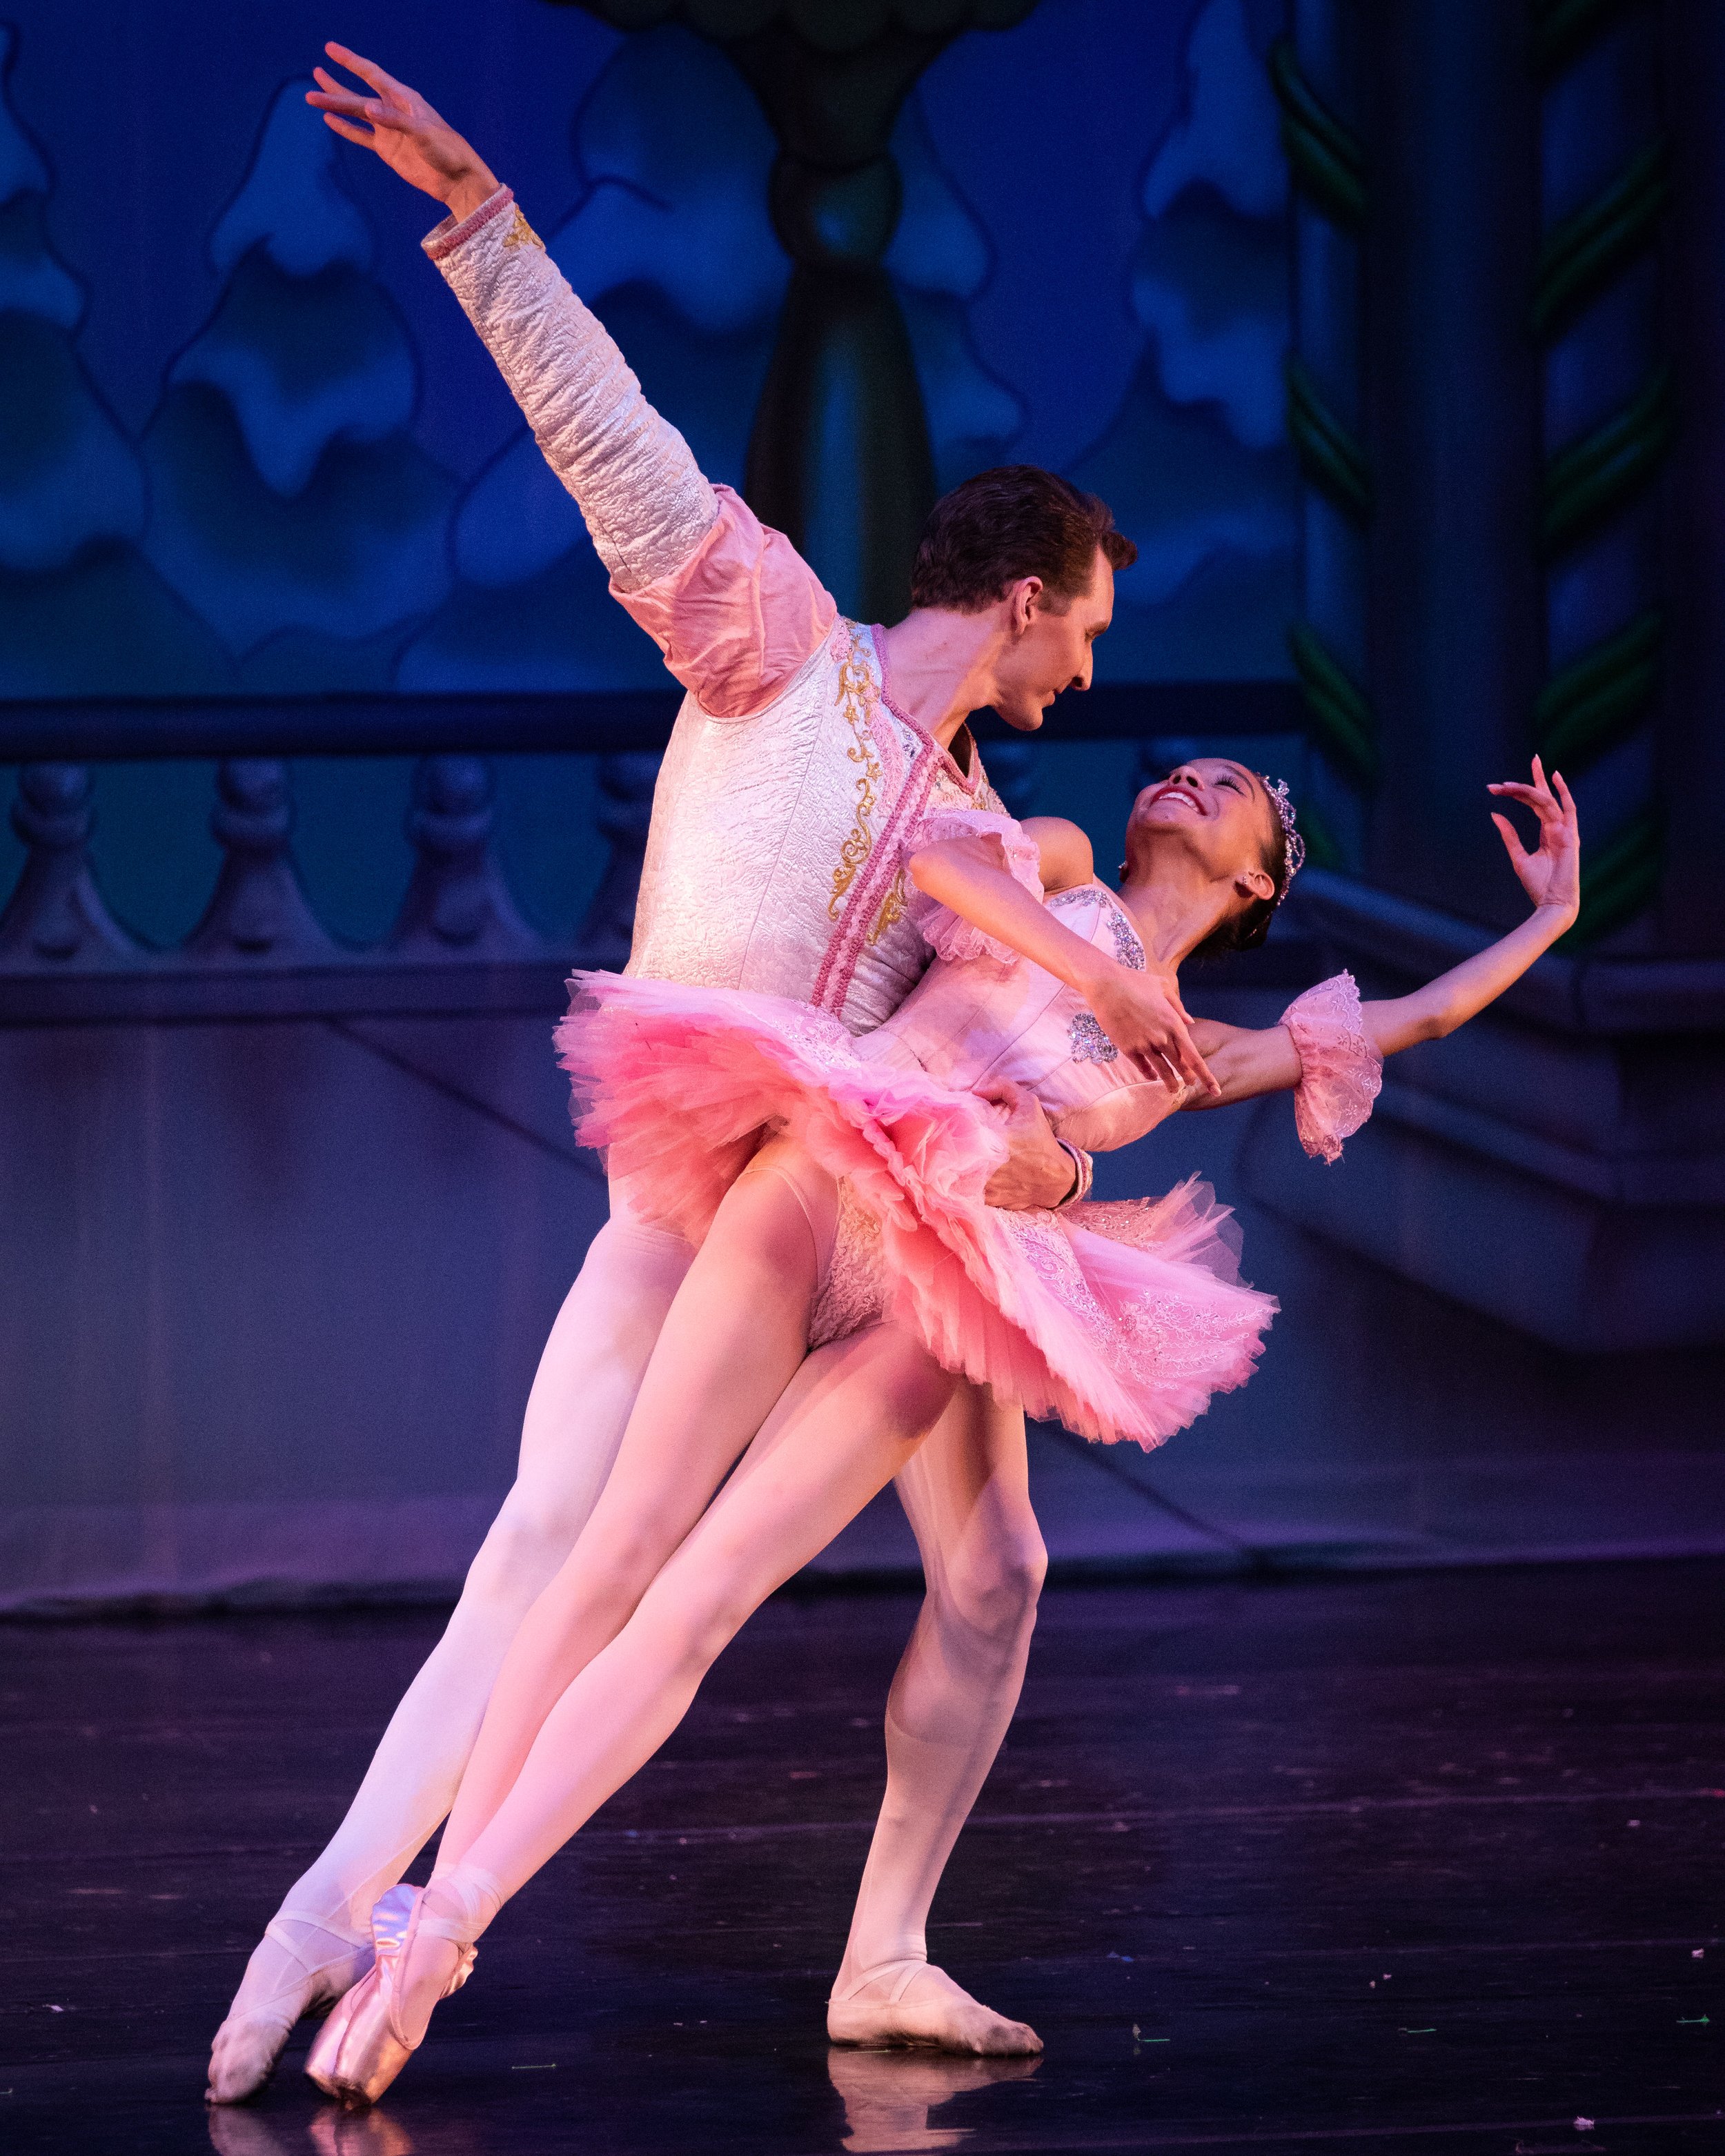  Jasime Harrison (right) and Maté Szentes (left) dancing together, as the characters Sugar Plum Fairy and her Cavalier,  during the Grand Pas de Deux right before the finale of The Nutcracker performed by Westside Ballet of Santa Monica at the The Br